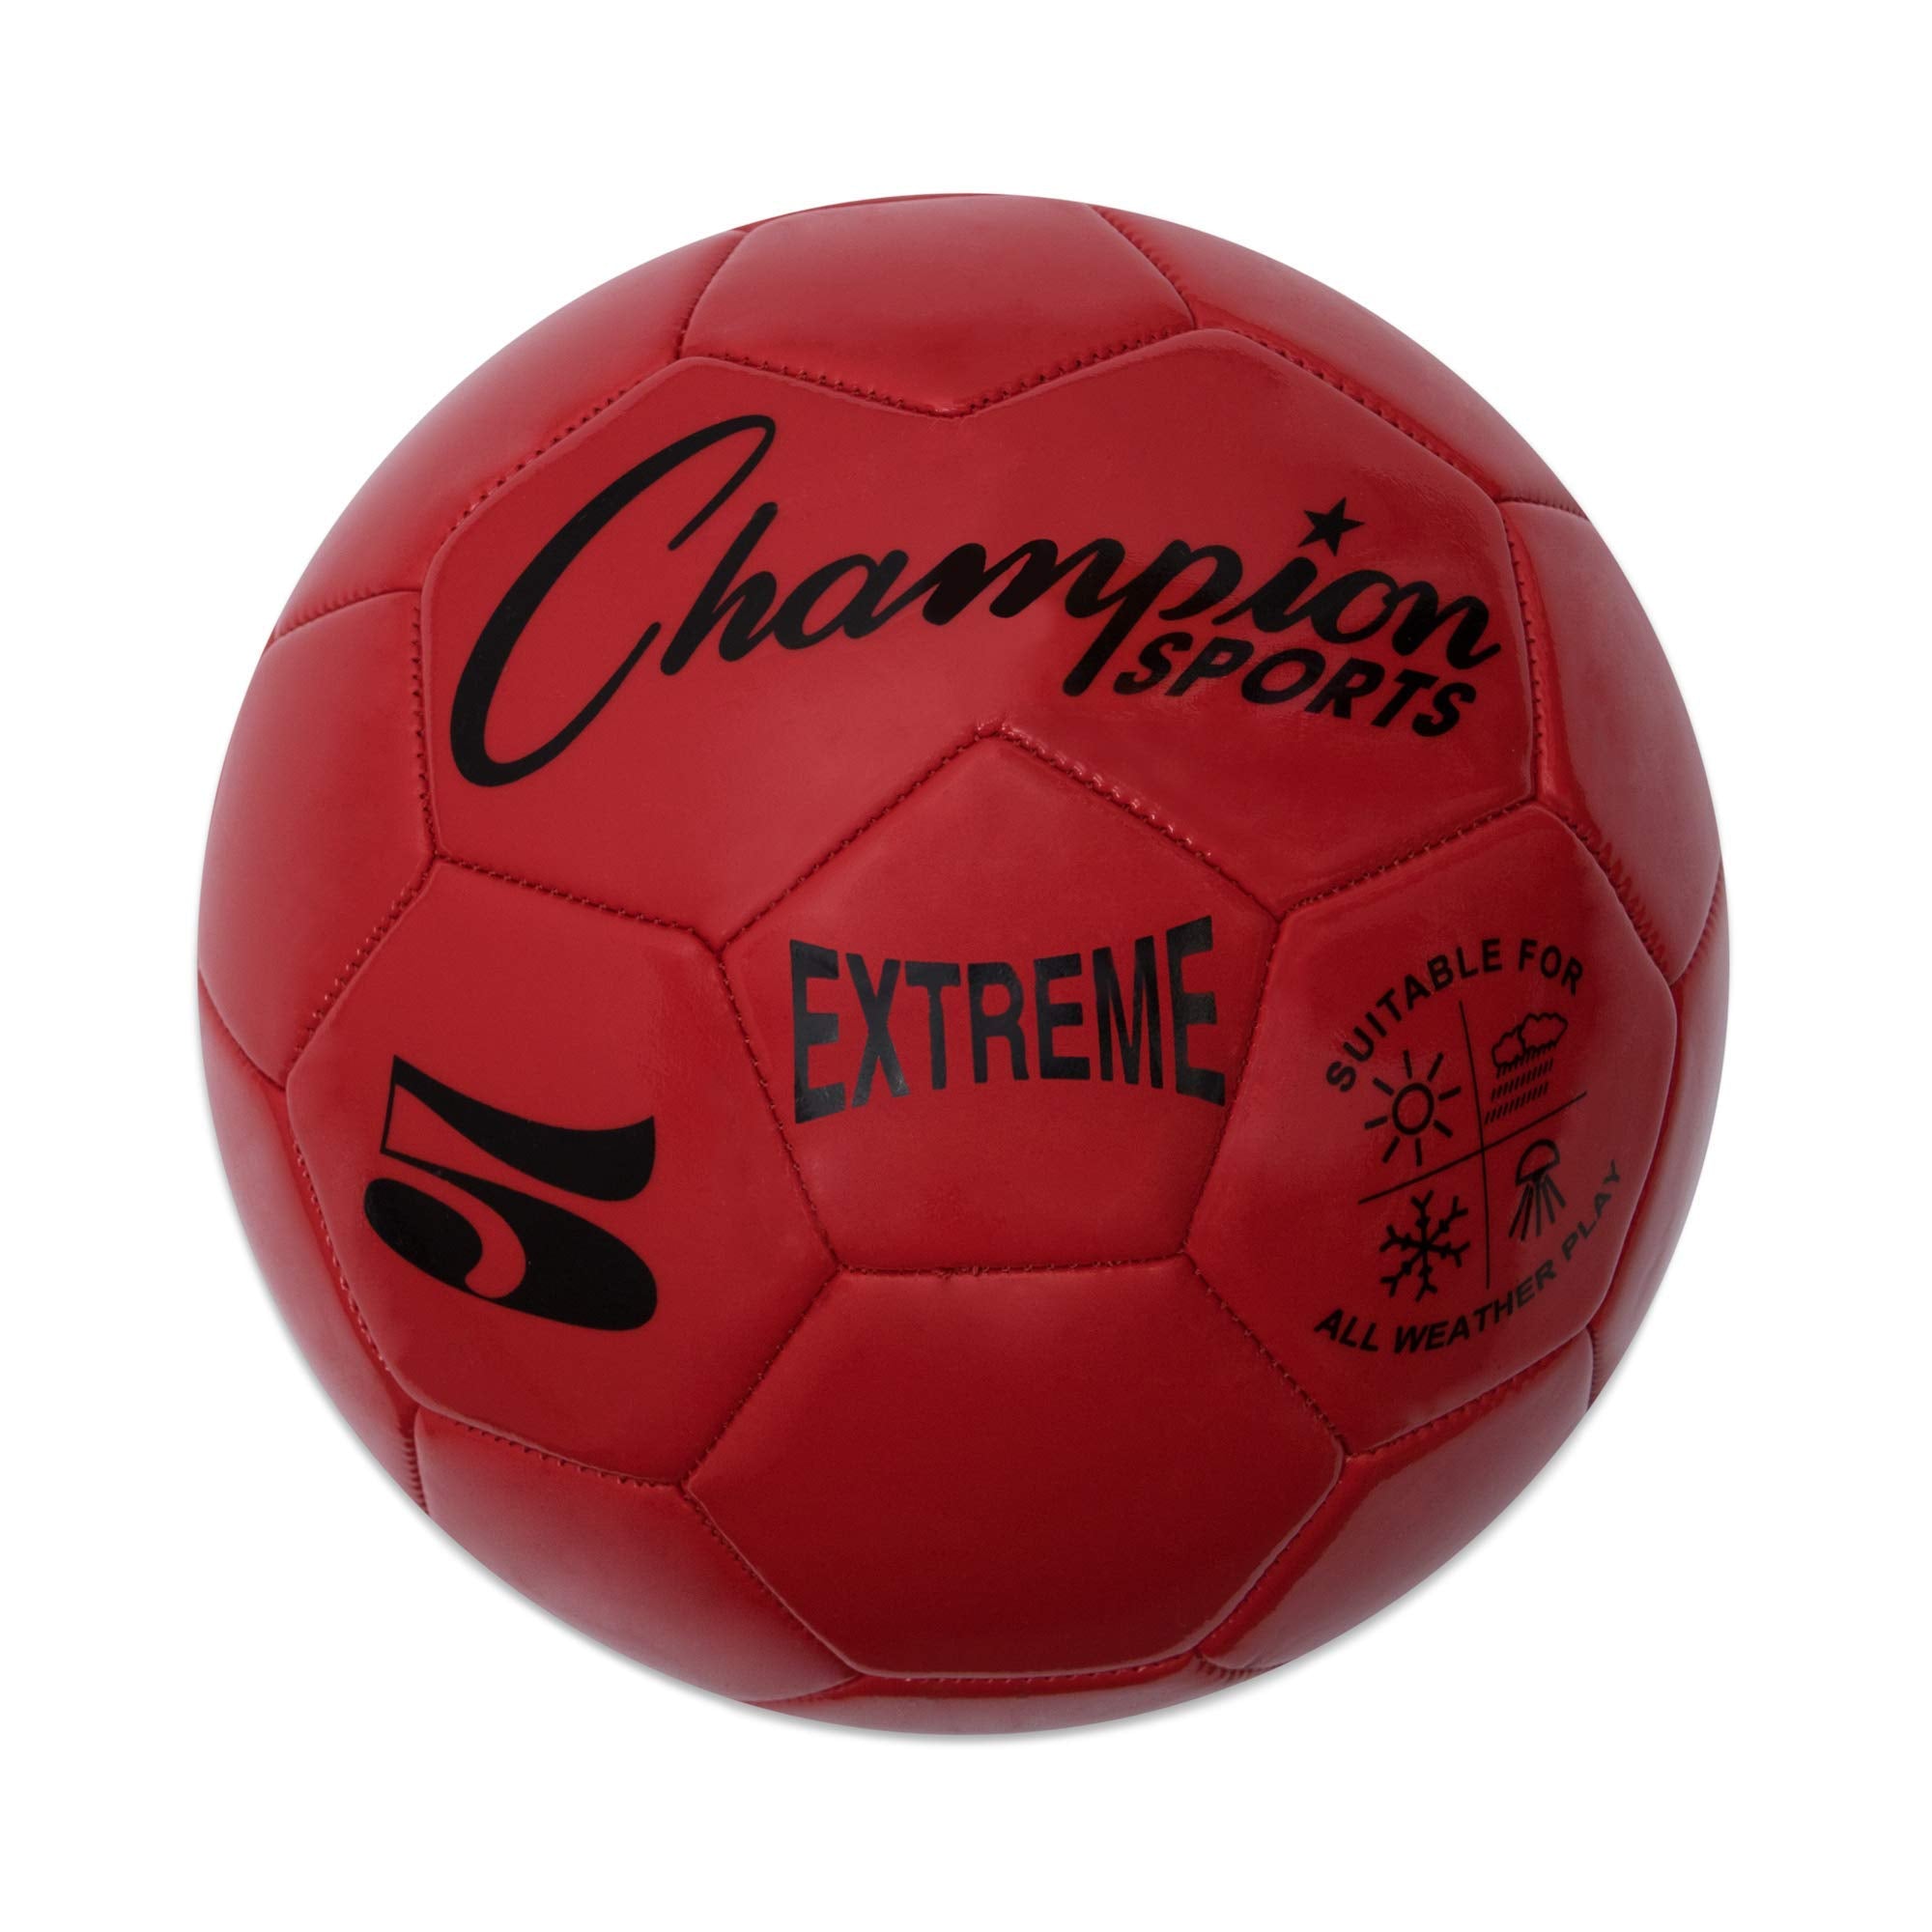 Champion Sports Extreme Series Composite Soccer Ball: Sizes 3, 4, 5 in Multiple Colors